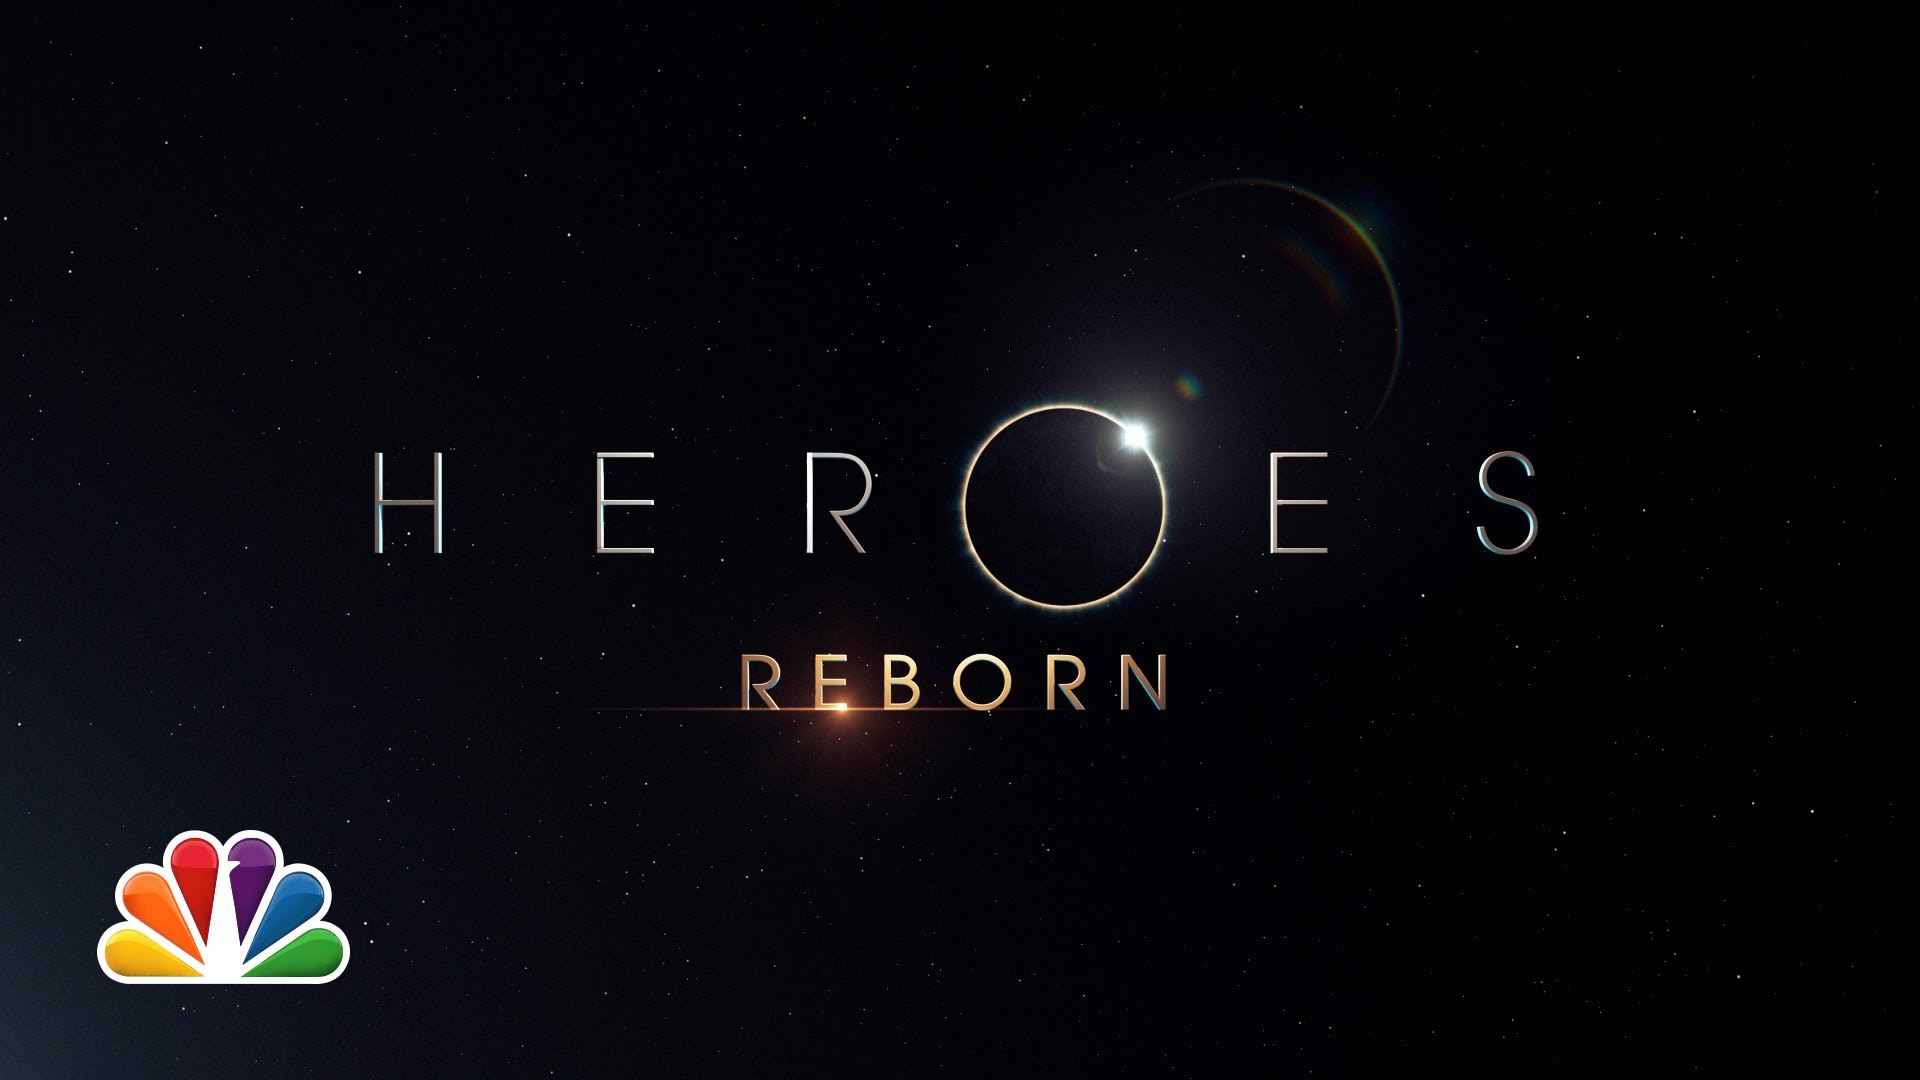 New Event Miniseries “Heroes Reborn” Comes to NBC in 2015